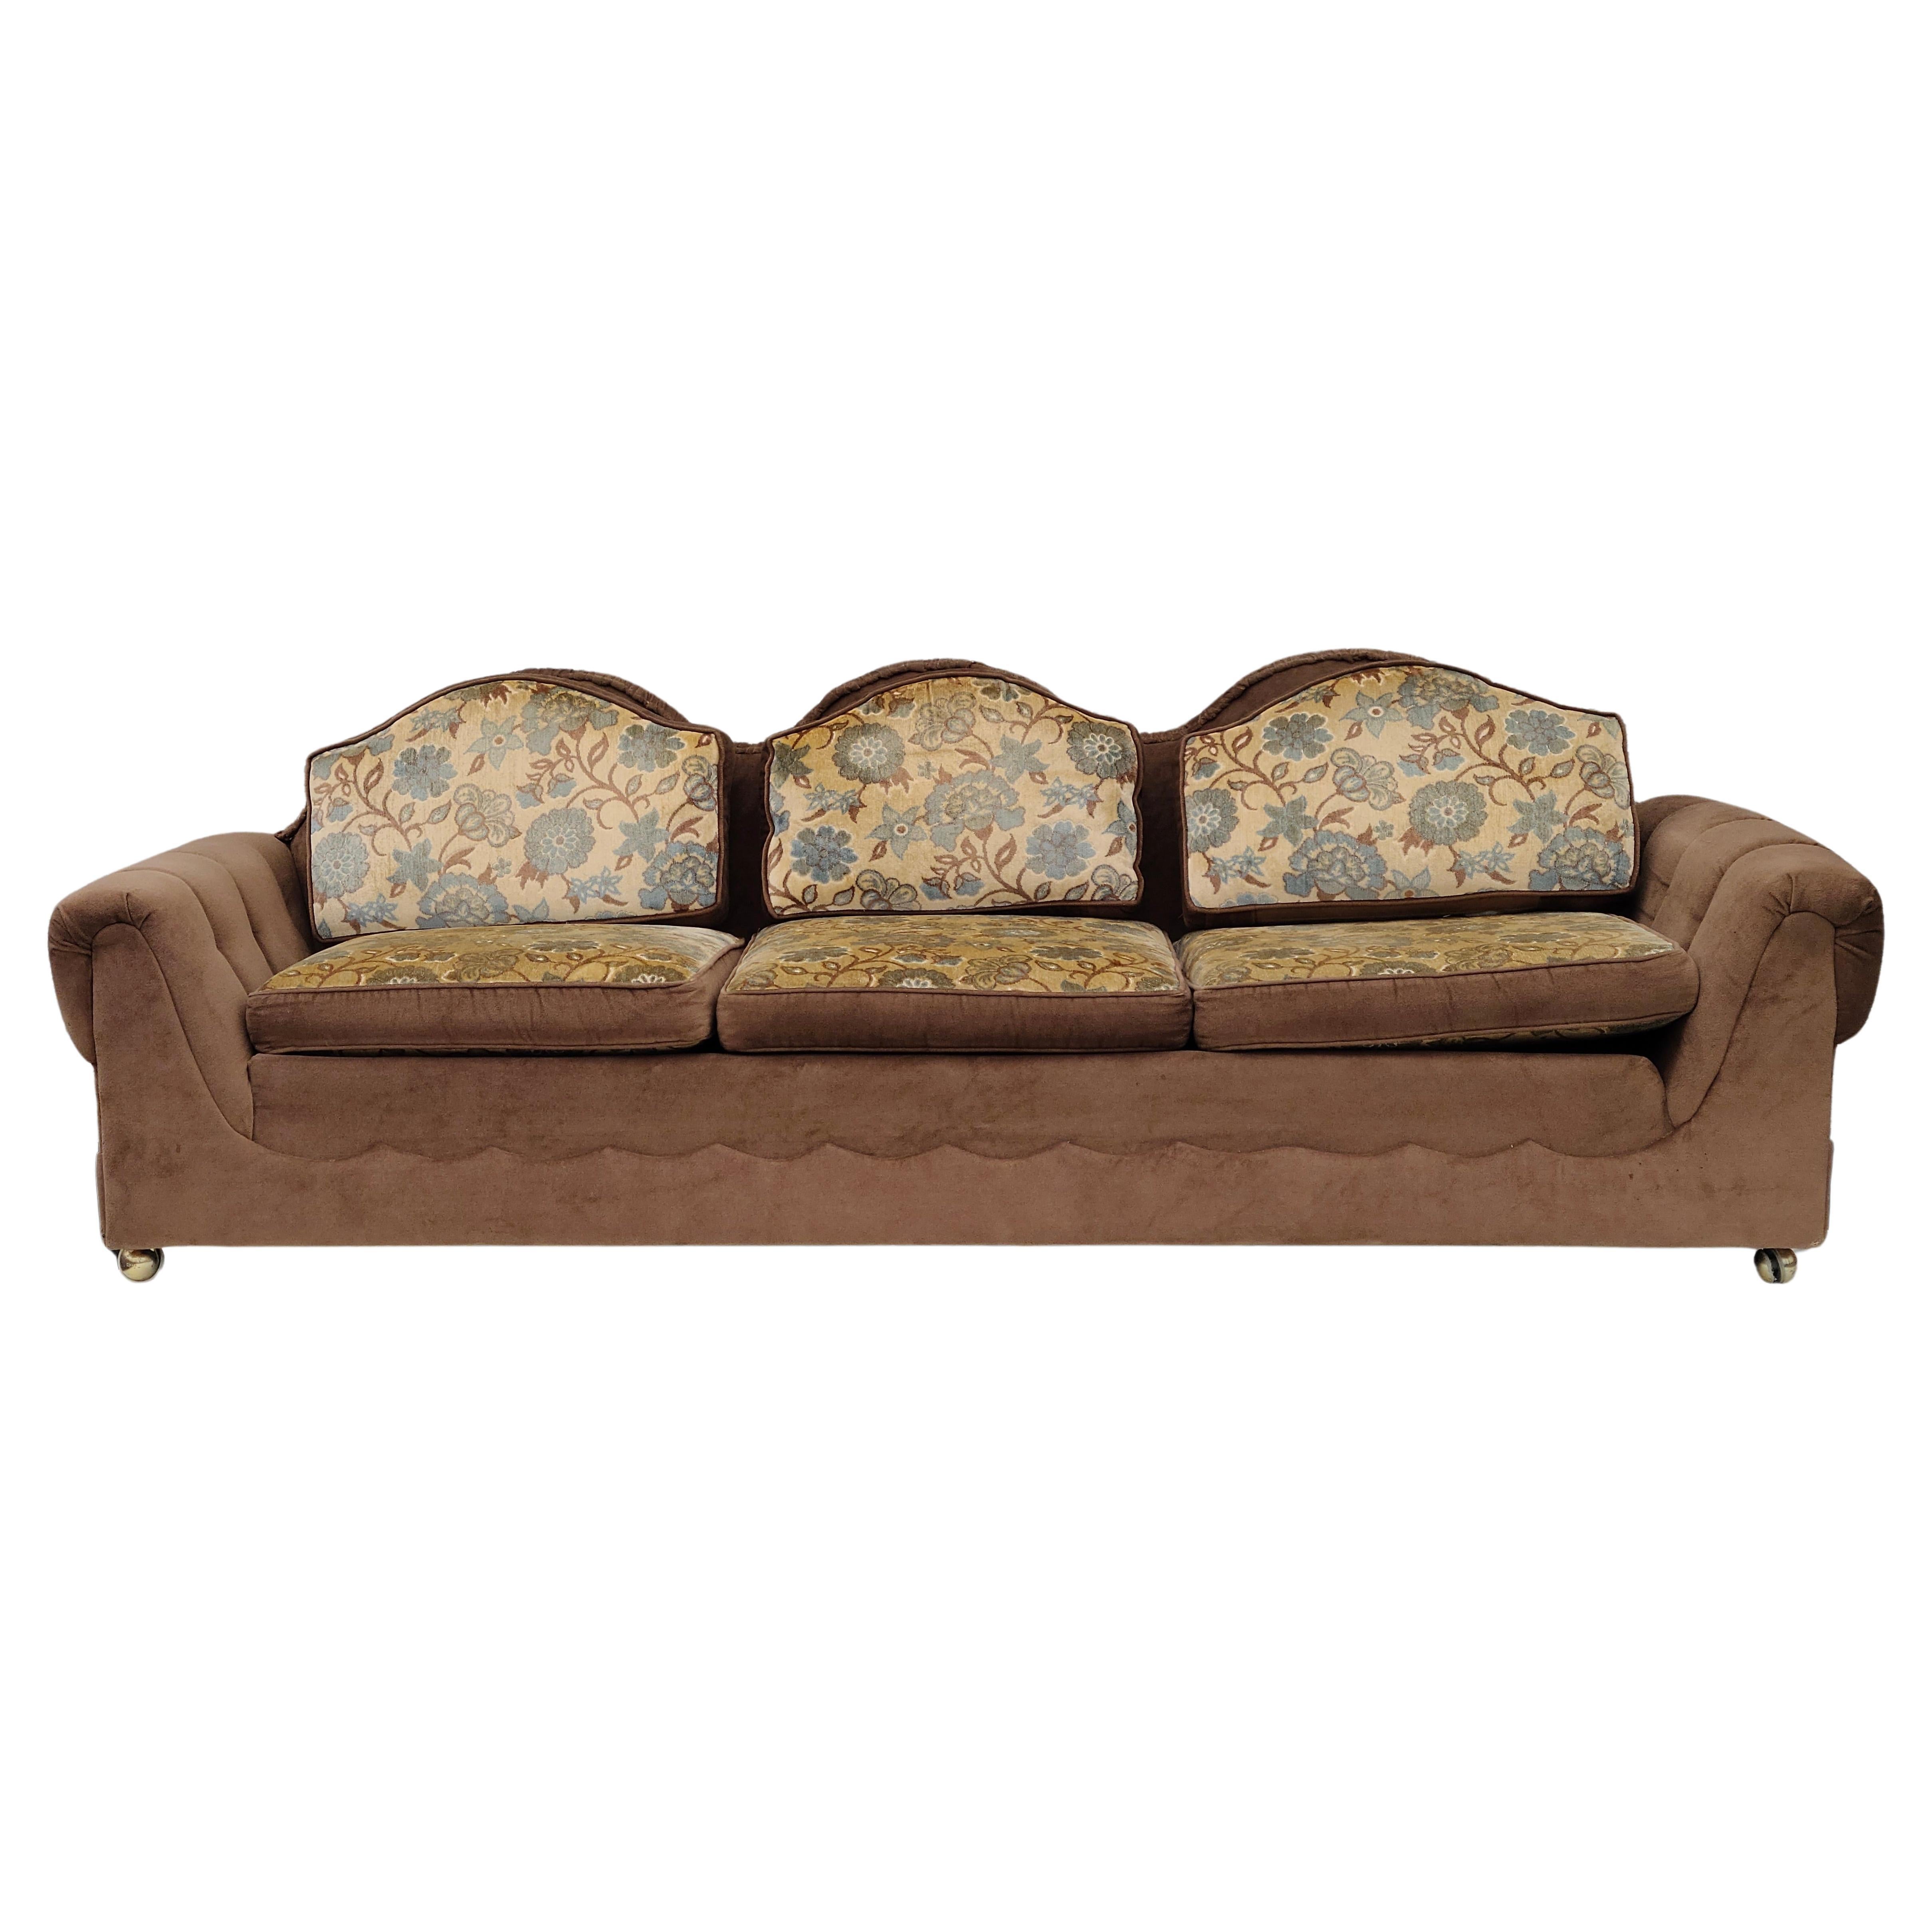 Craft Associates Sofa Strictly Spanish Group In Good Condition For Sale In Fraser, MI